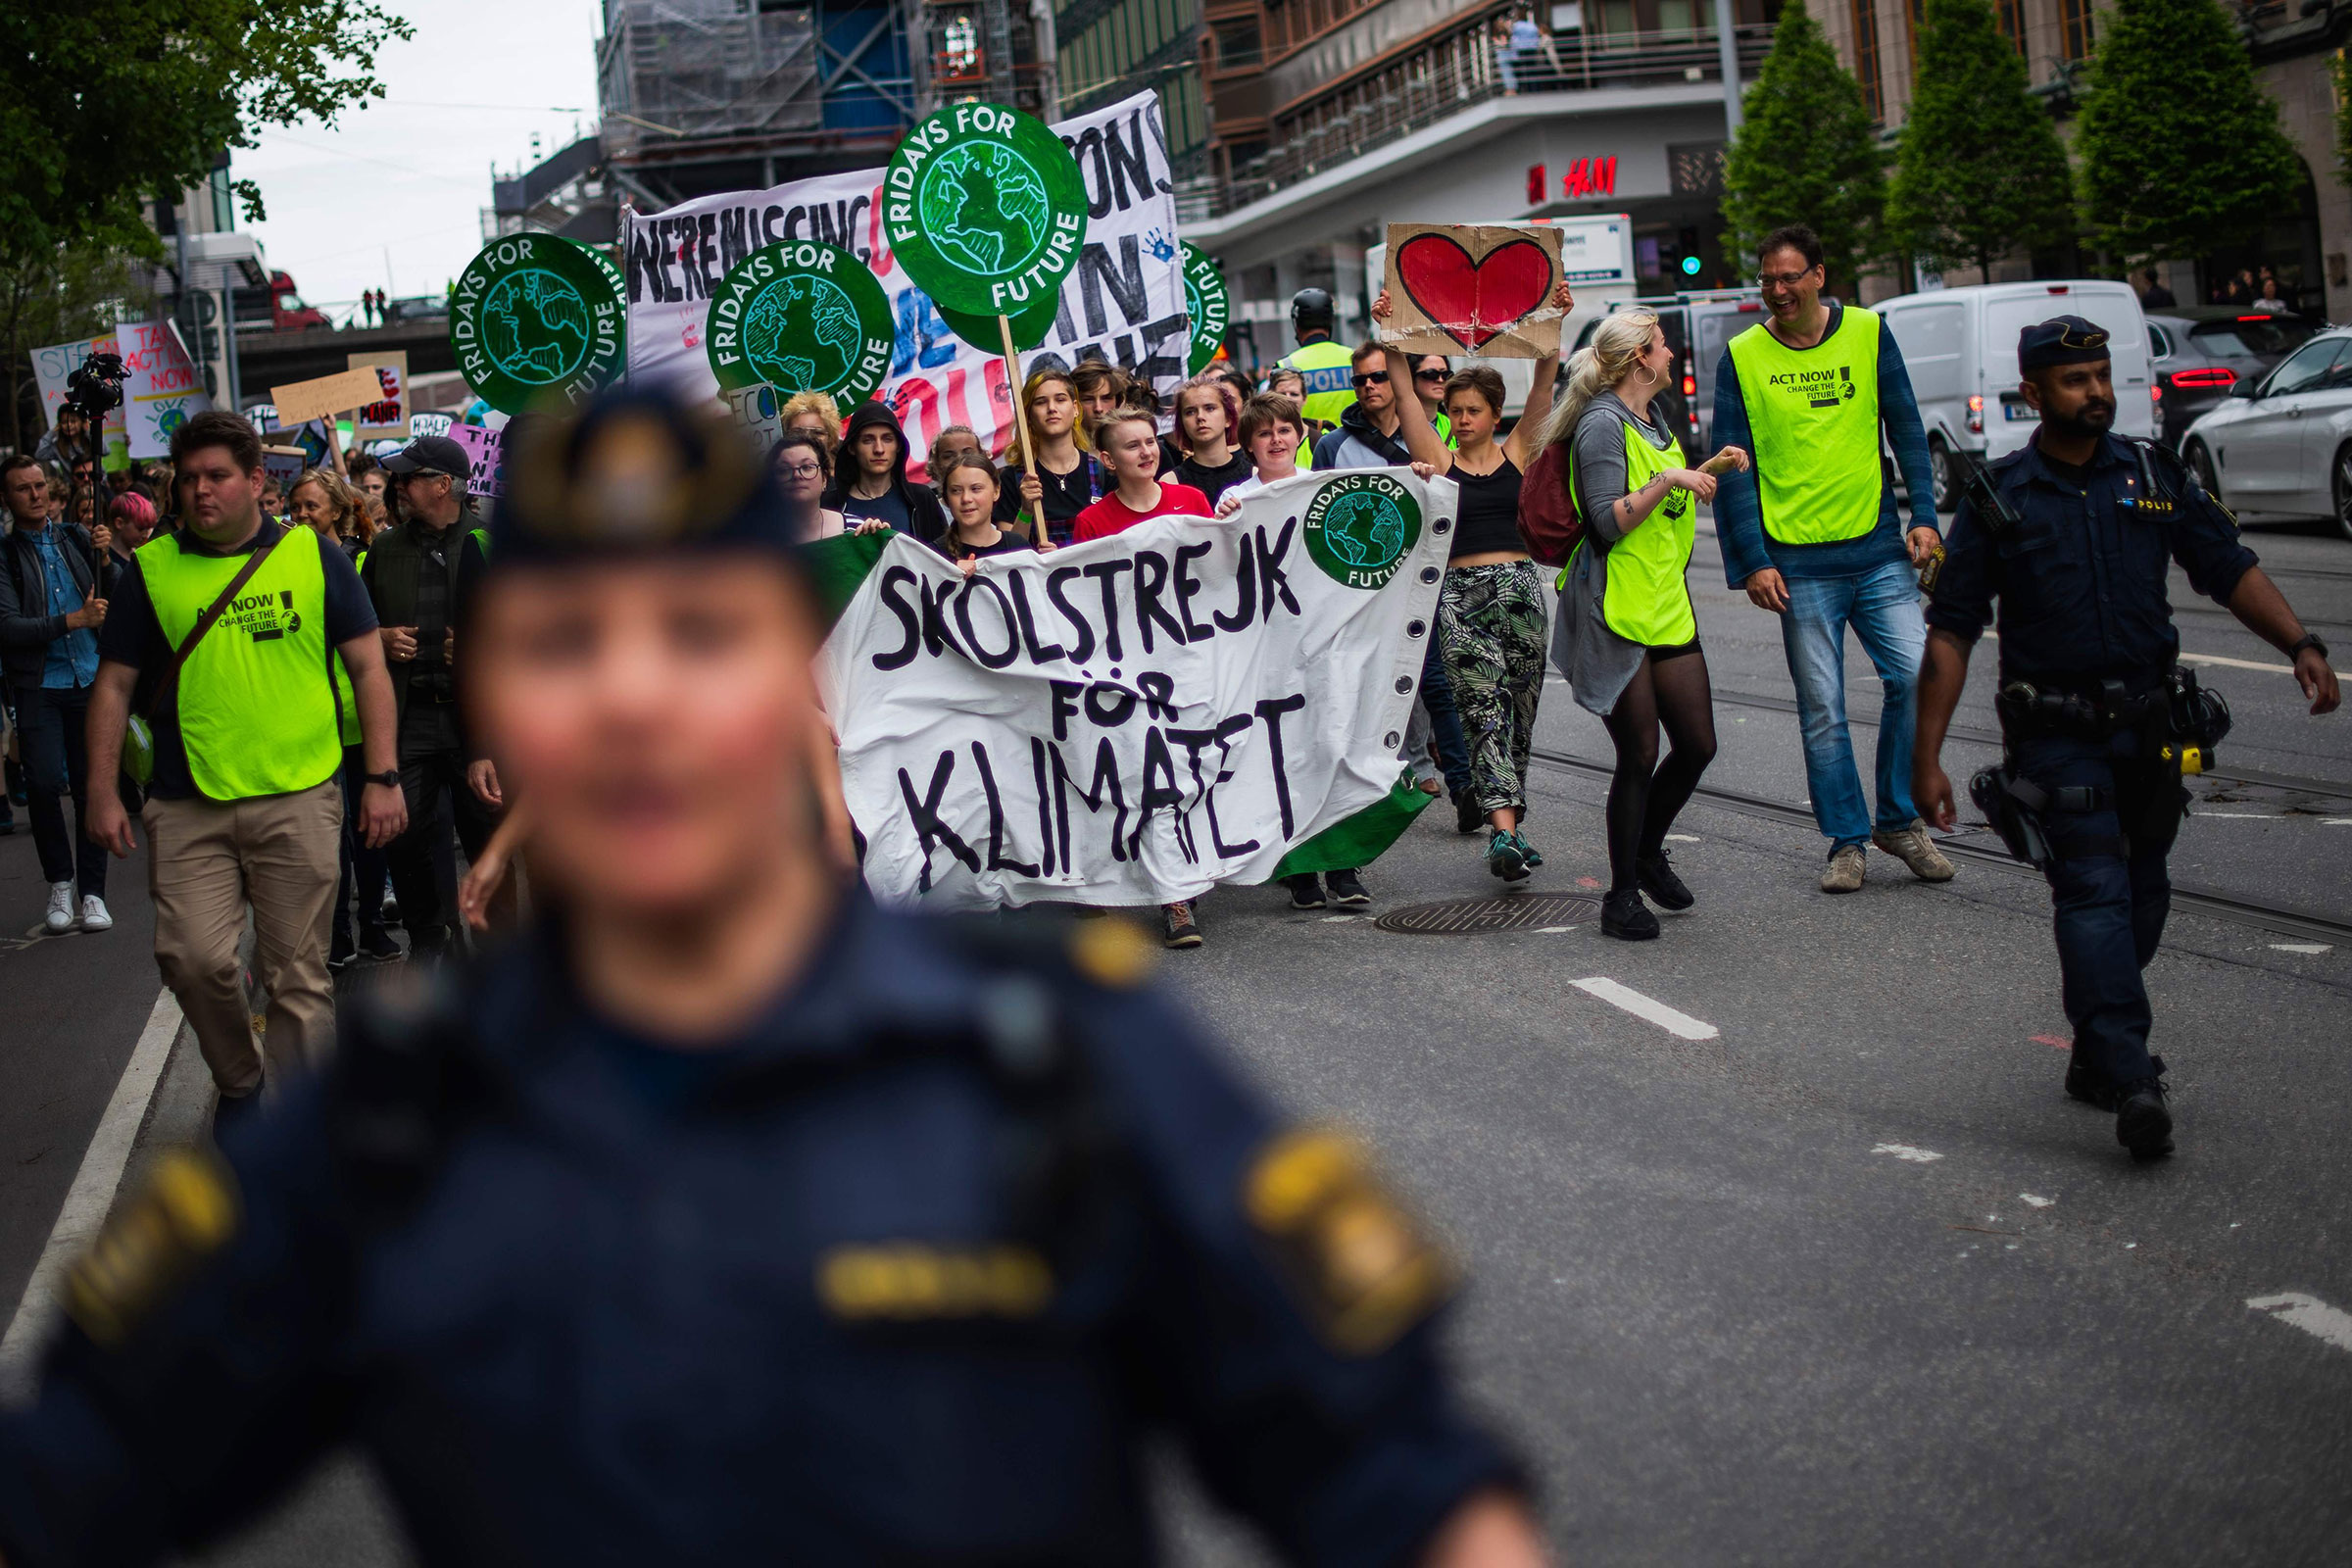 Greta Thunberg (2ndL behind the banner), the 16-year-old Swedish climate activist, marches during the "Global Strike For Future" movement on a global day of student protests aiming to spark world leaders into action on climate change in Stockholm, Sweden on May 24, 2019. (Jonathan Nackstrand—AFP/Getty Images)